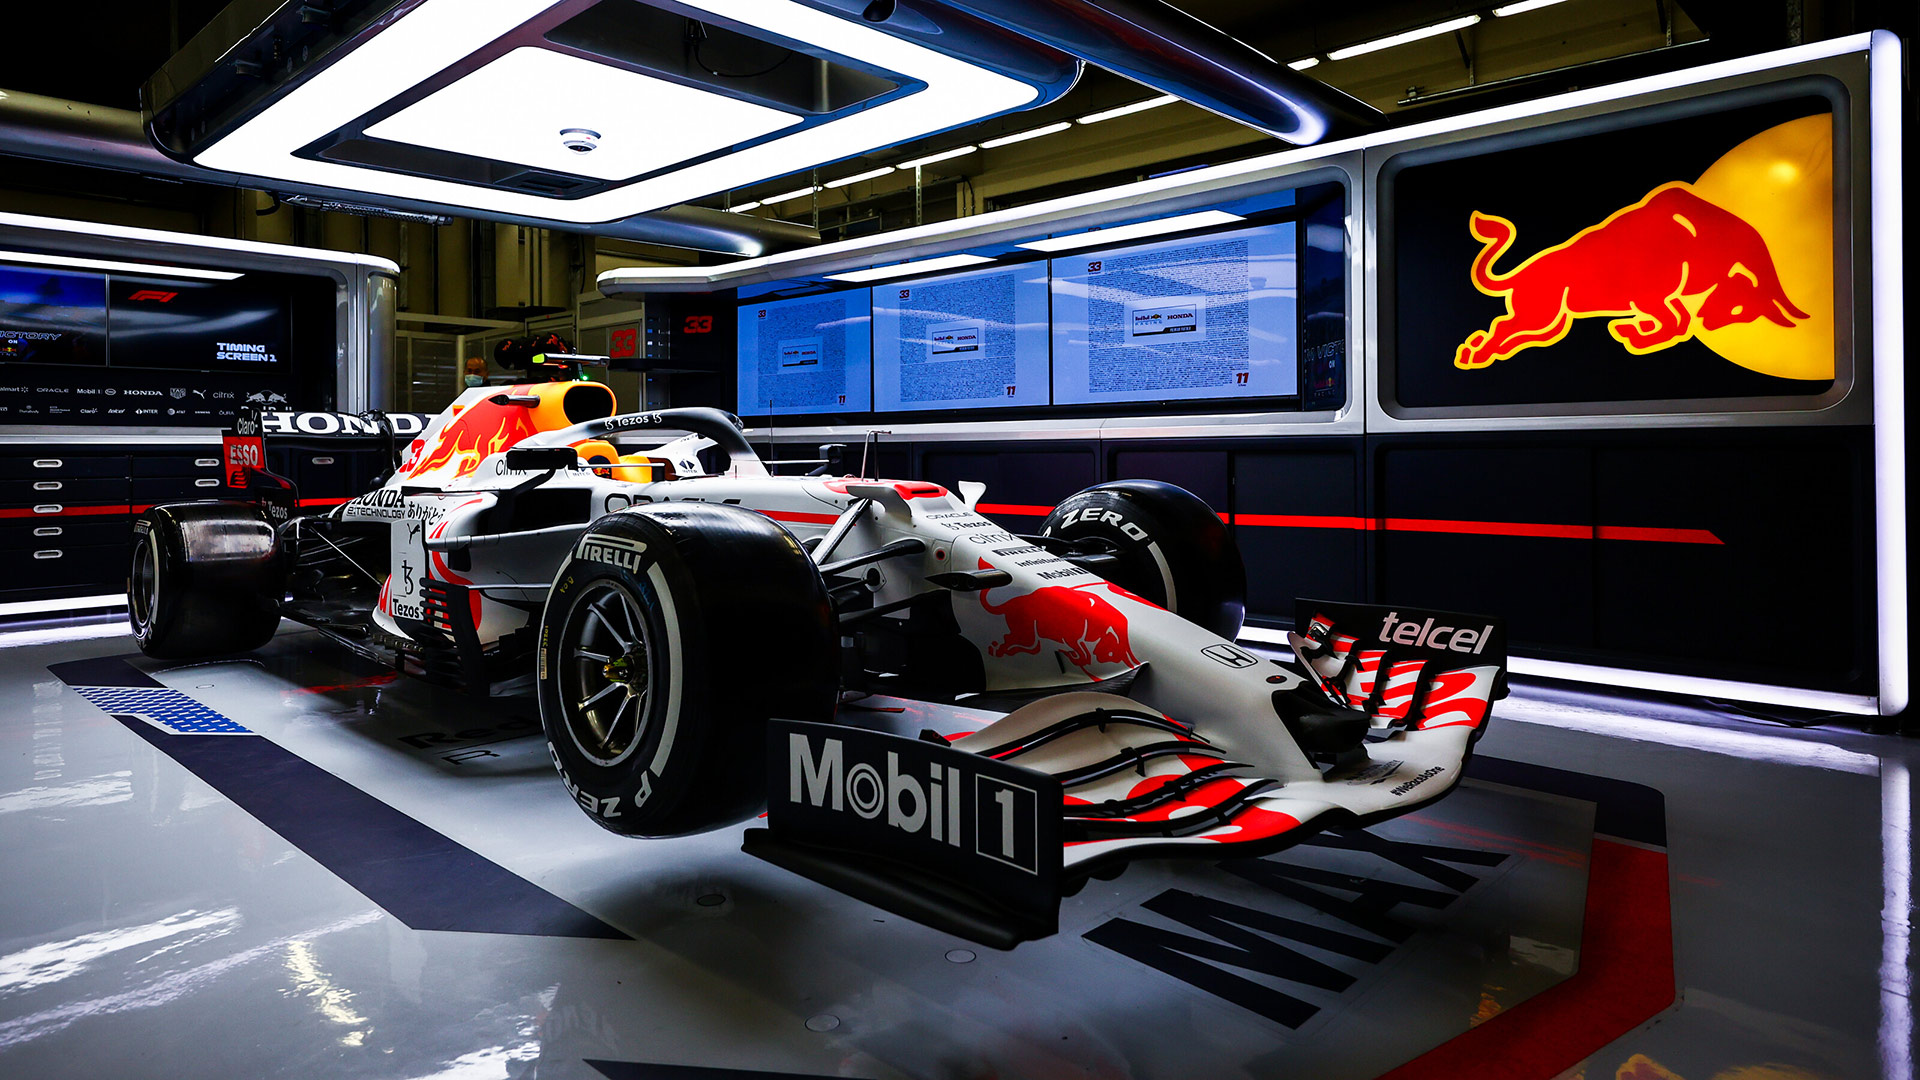 Red Bull F1 Wallpapers